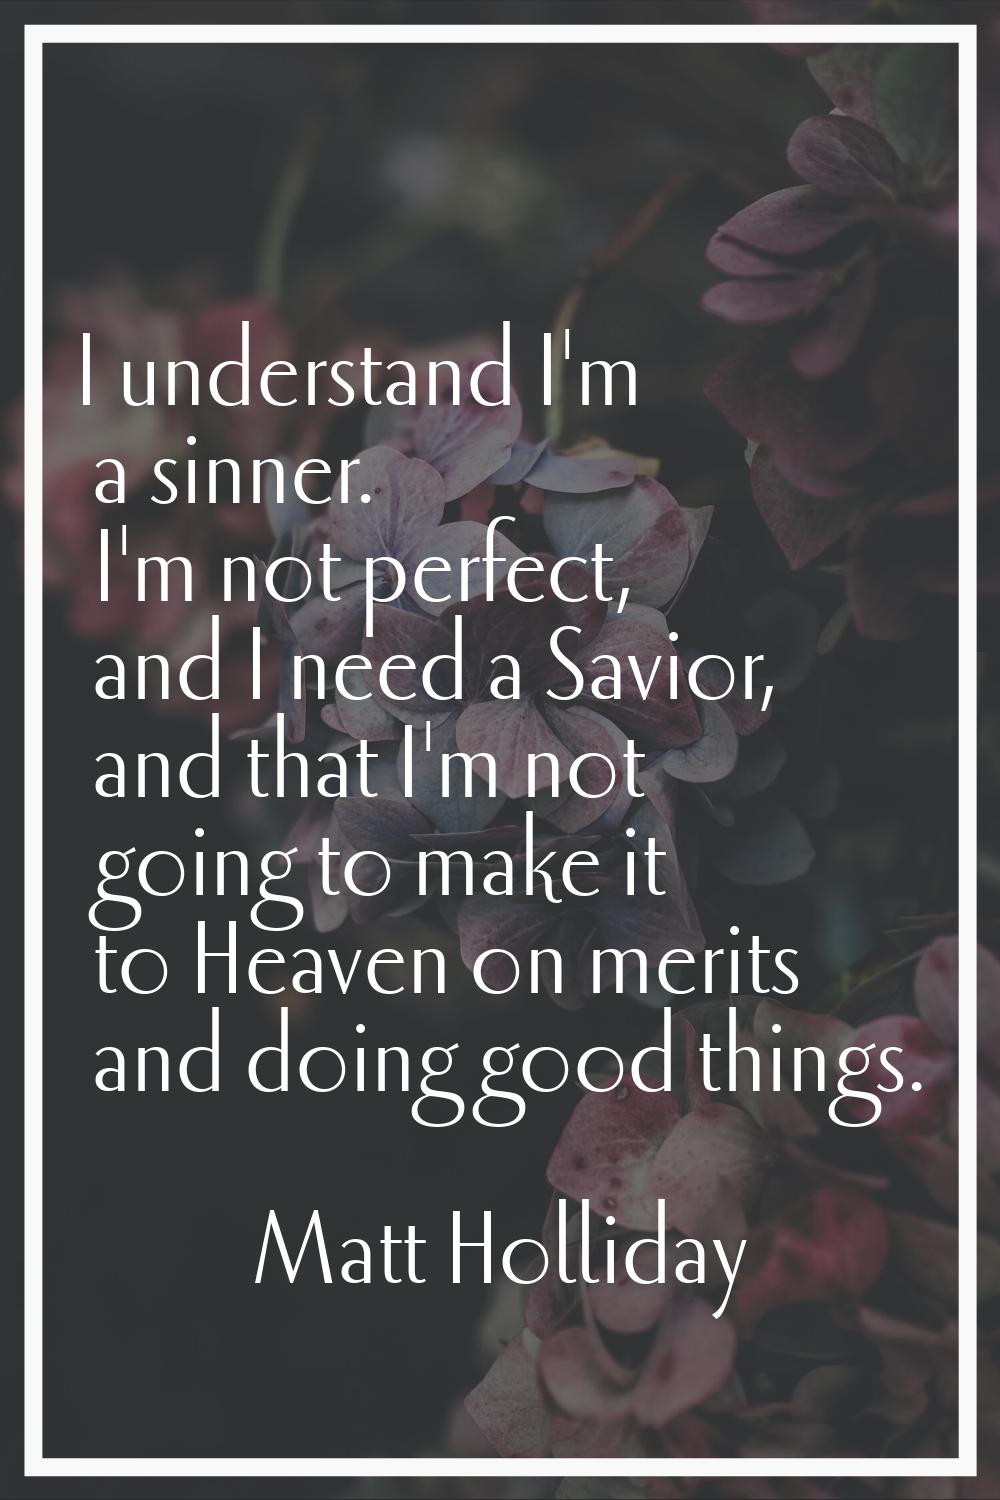 I understand I'm a sinner. I'm not perfect, and I need a Savior, and that I'm not going to make it 